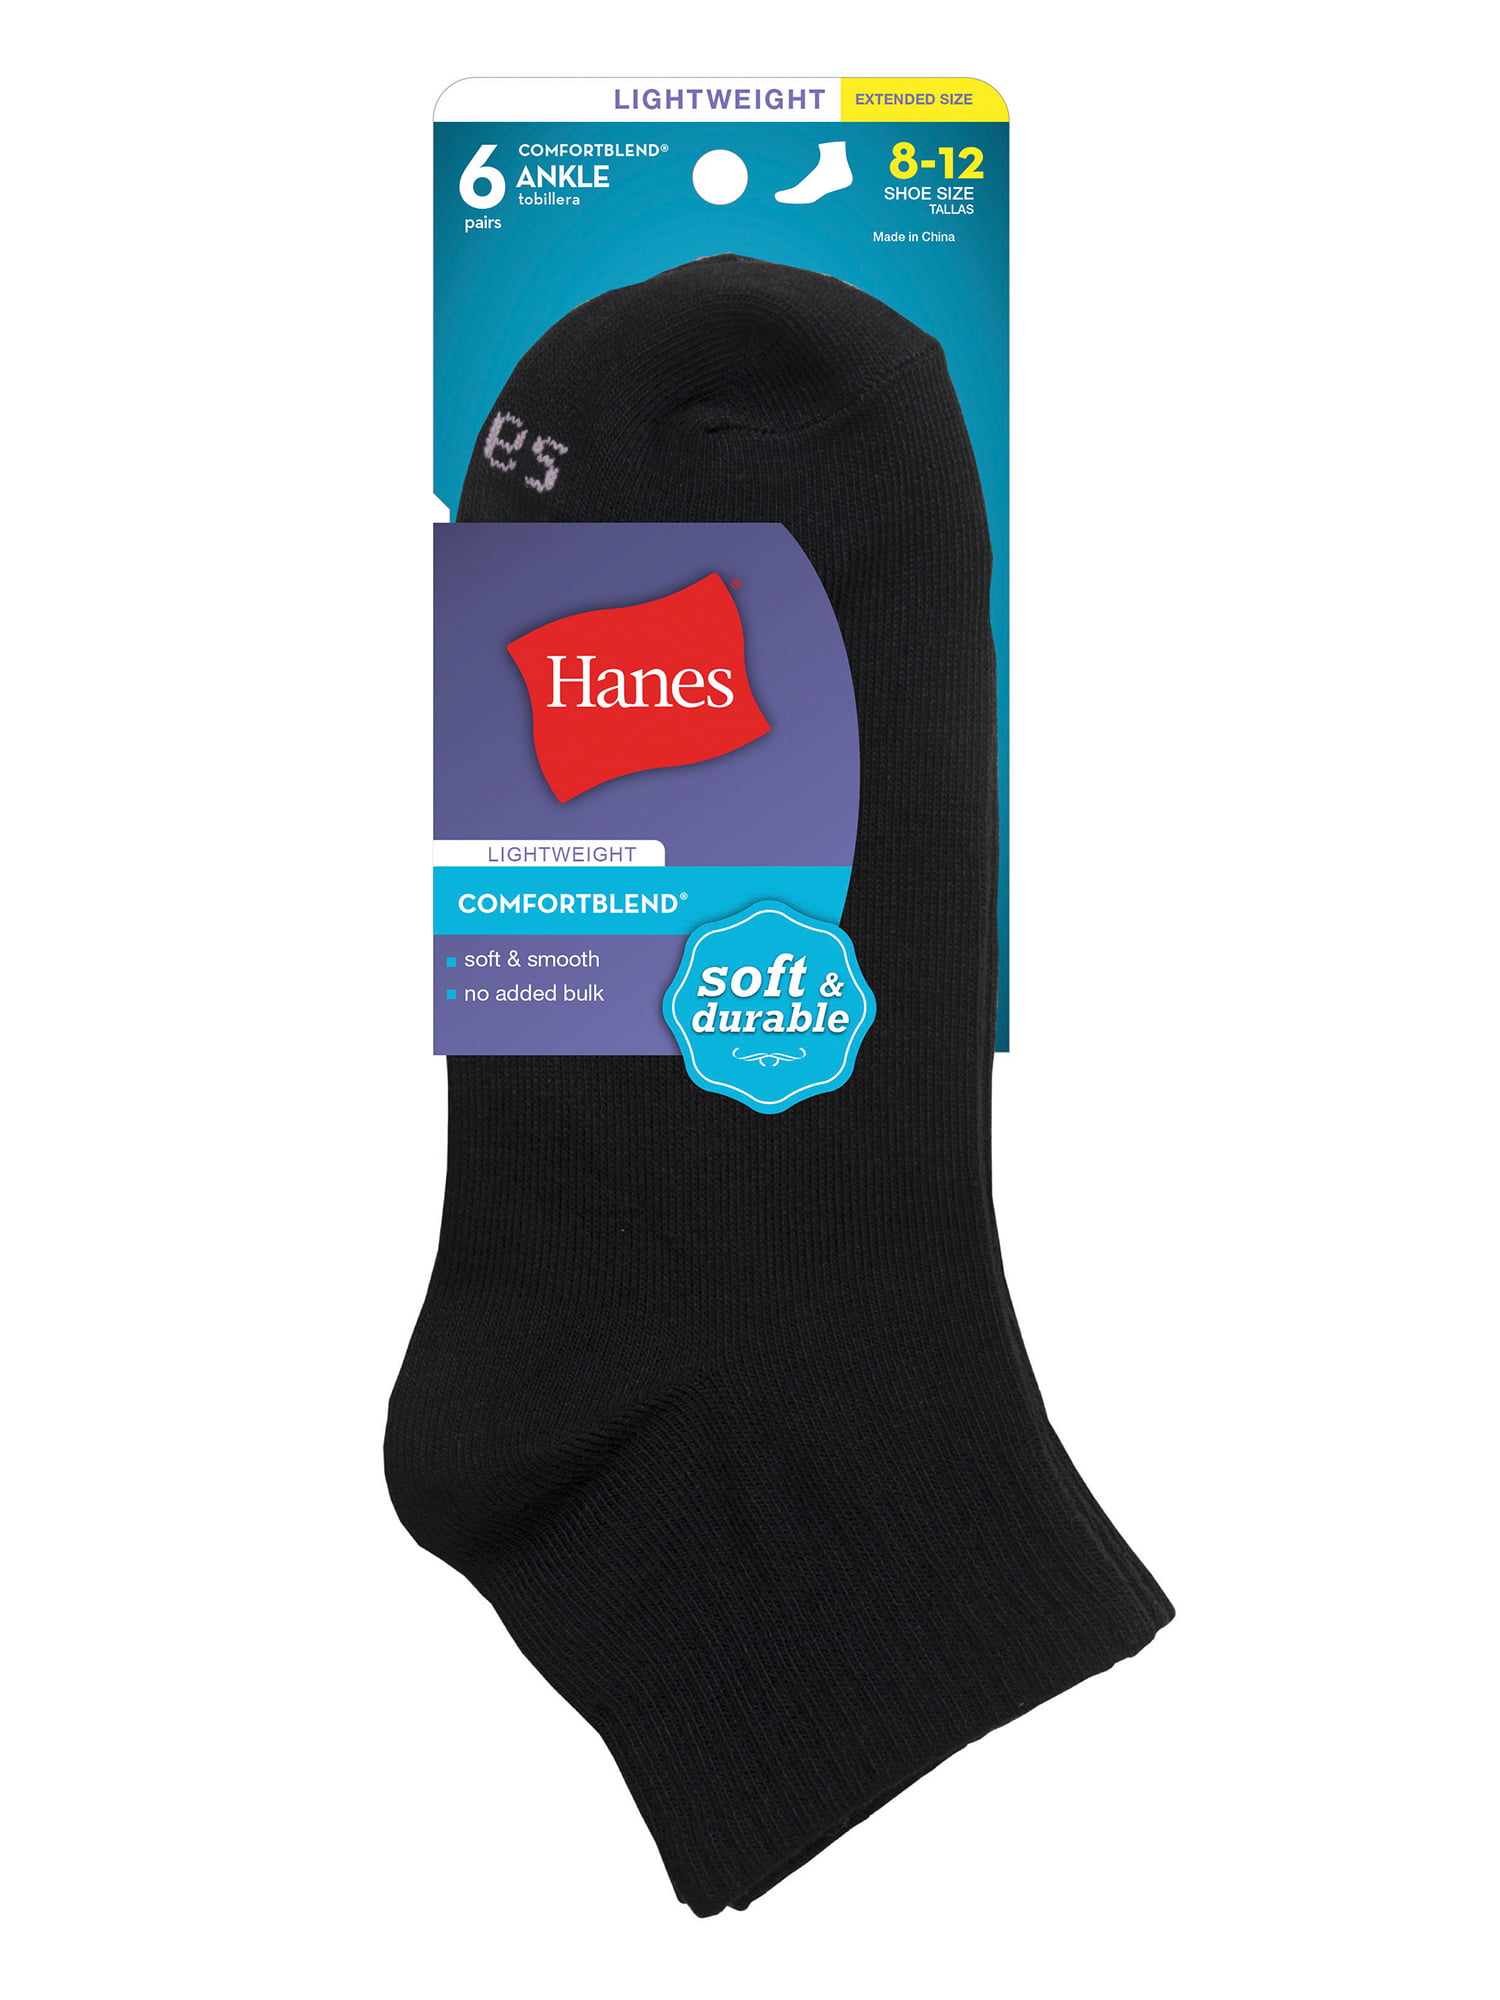 Hanes Women's Ankle ComfortBlend Socks 6 Pairs Extended Shoe Size 8-12